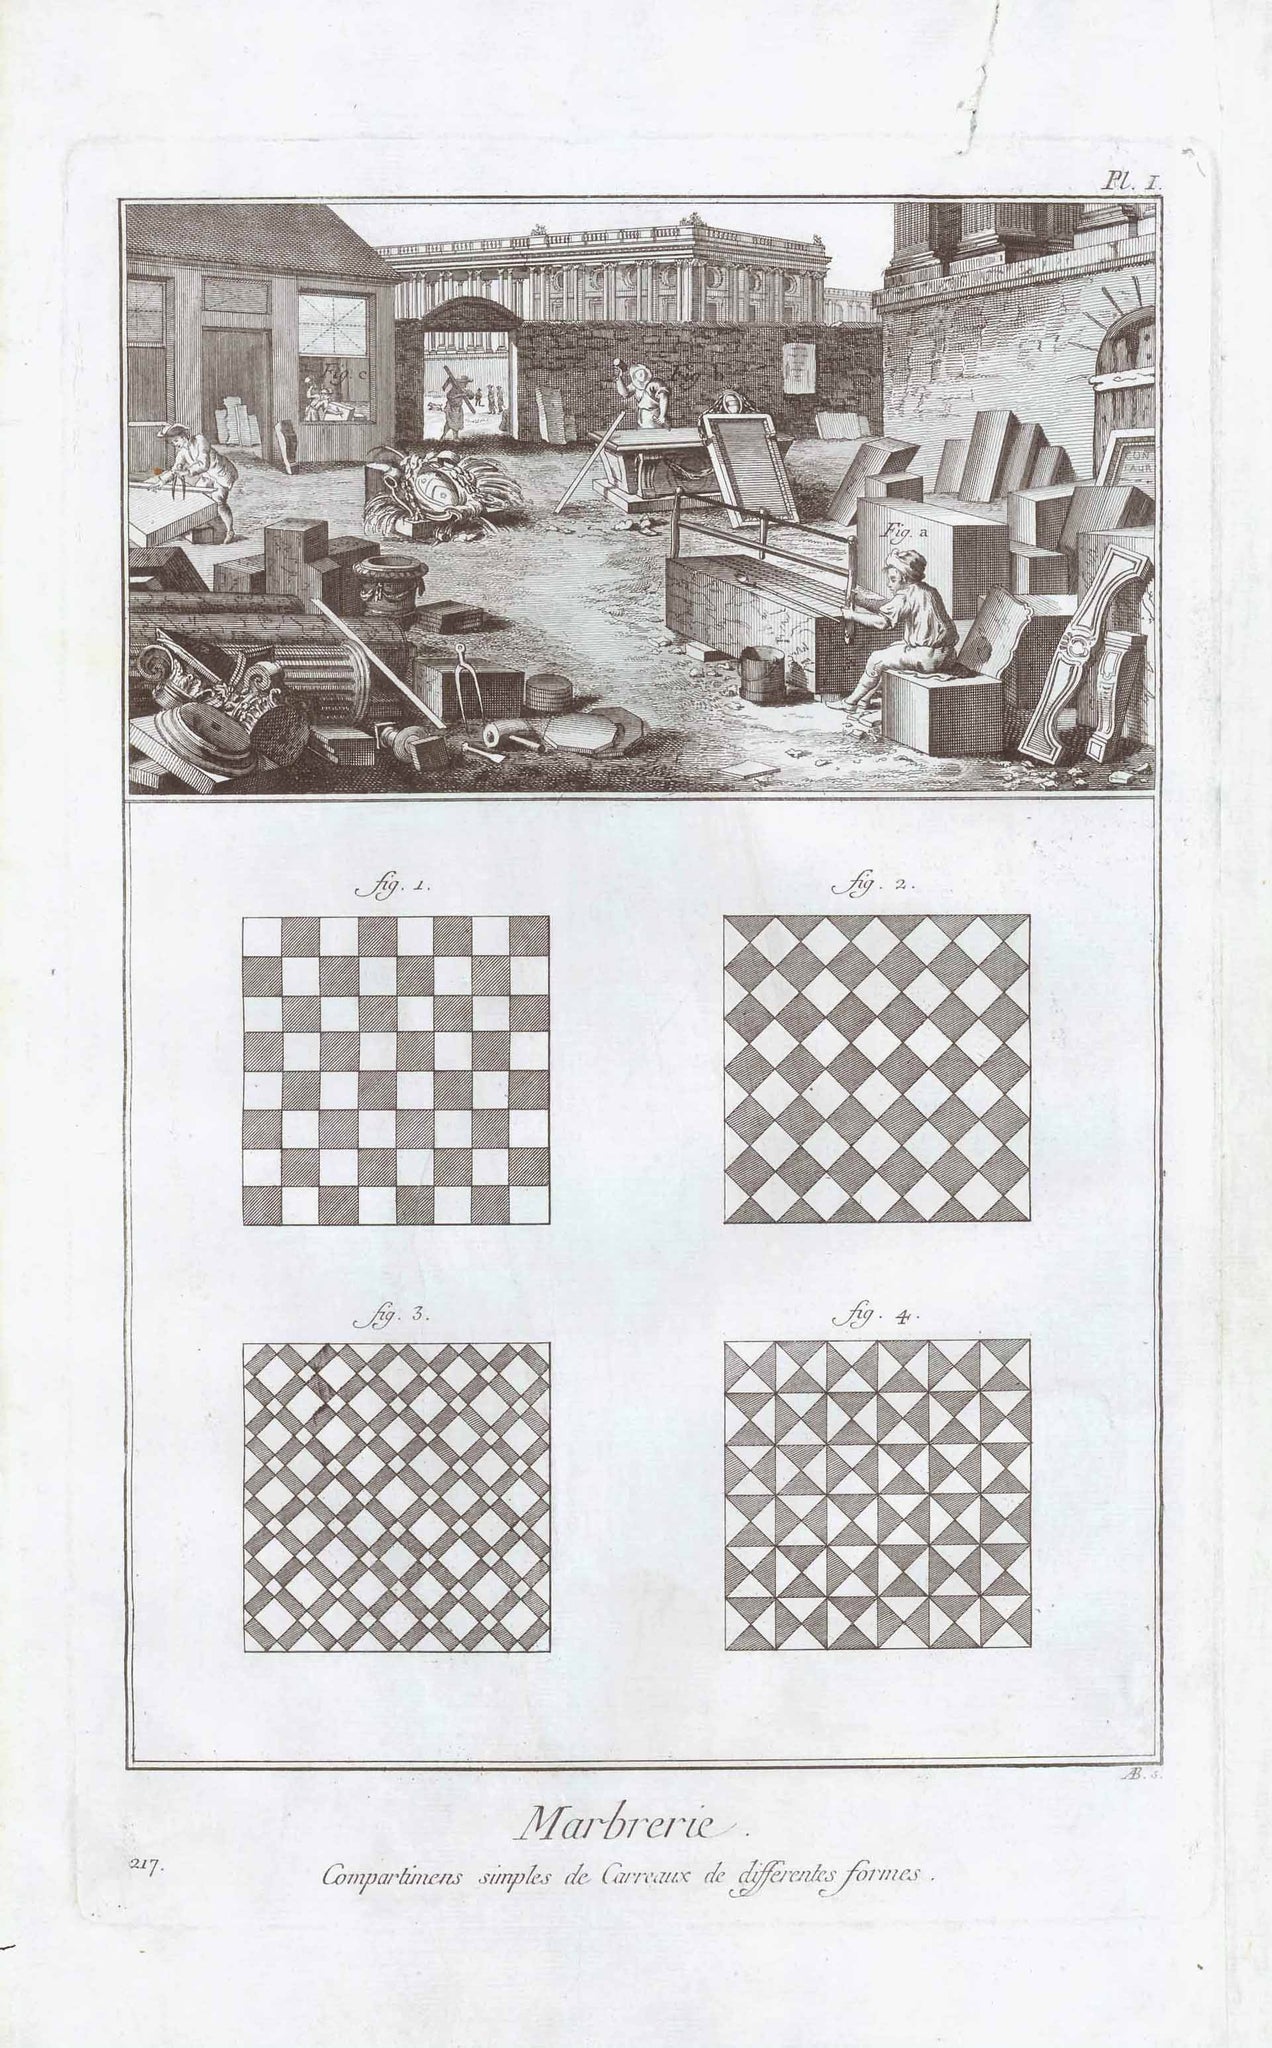 "Marbrerie" "Compartimens simples de Carreaux de differents forms"  At the top of the first page is a detailed image of a stone metz working with marble. Notice the various classic designs made with different colors of marble.  2 Copper etchings by Robert Bernard (1734-1777)  Published in "Encyclopedie"  by Denis Diderot (1713-1784)